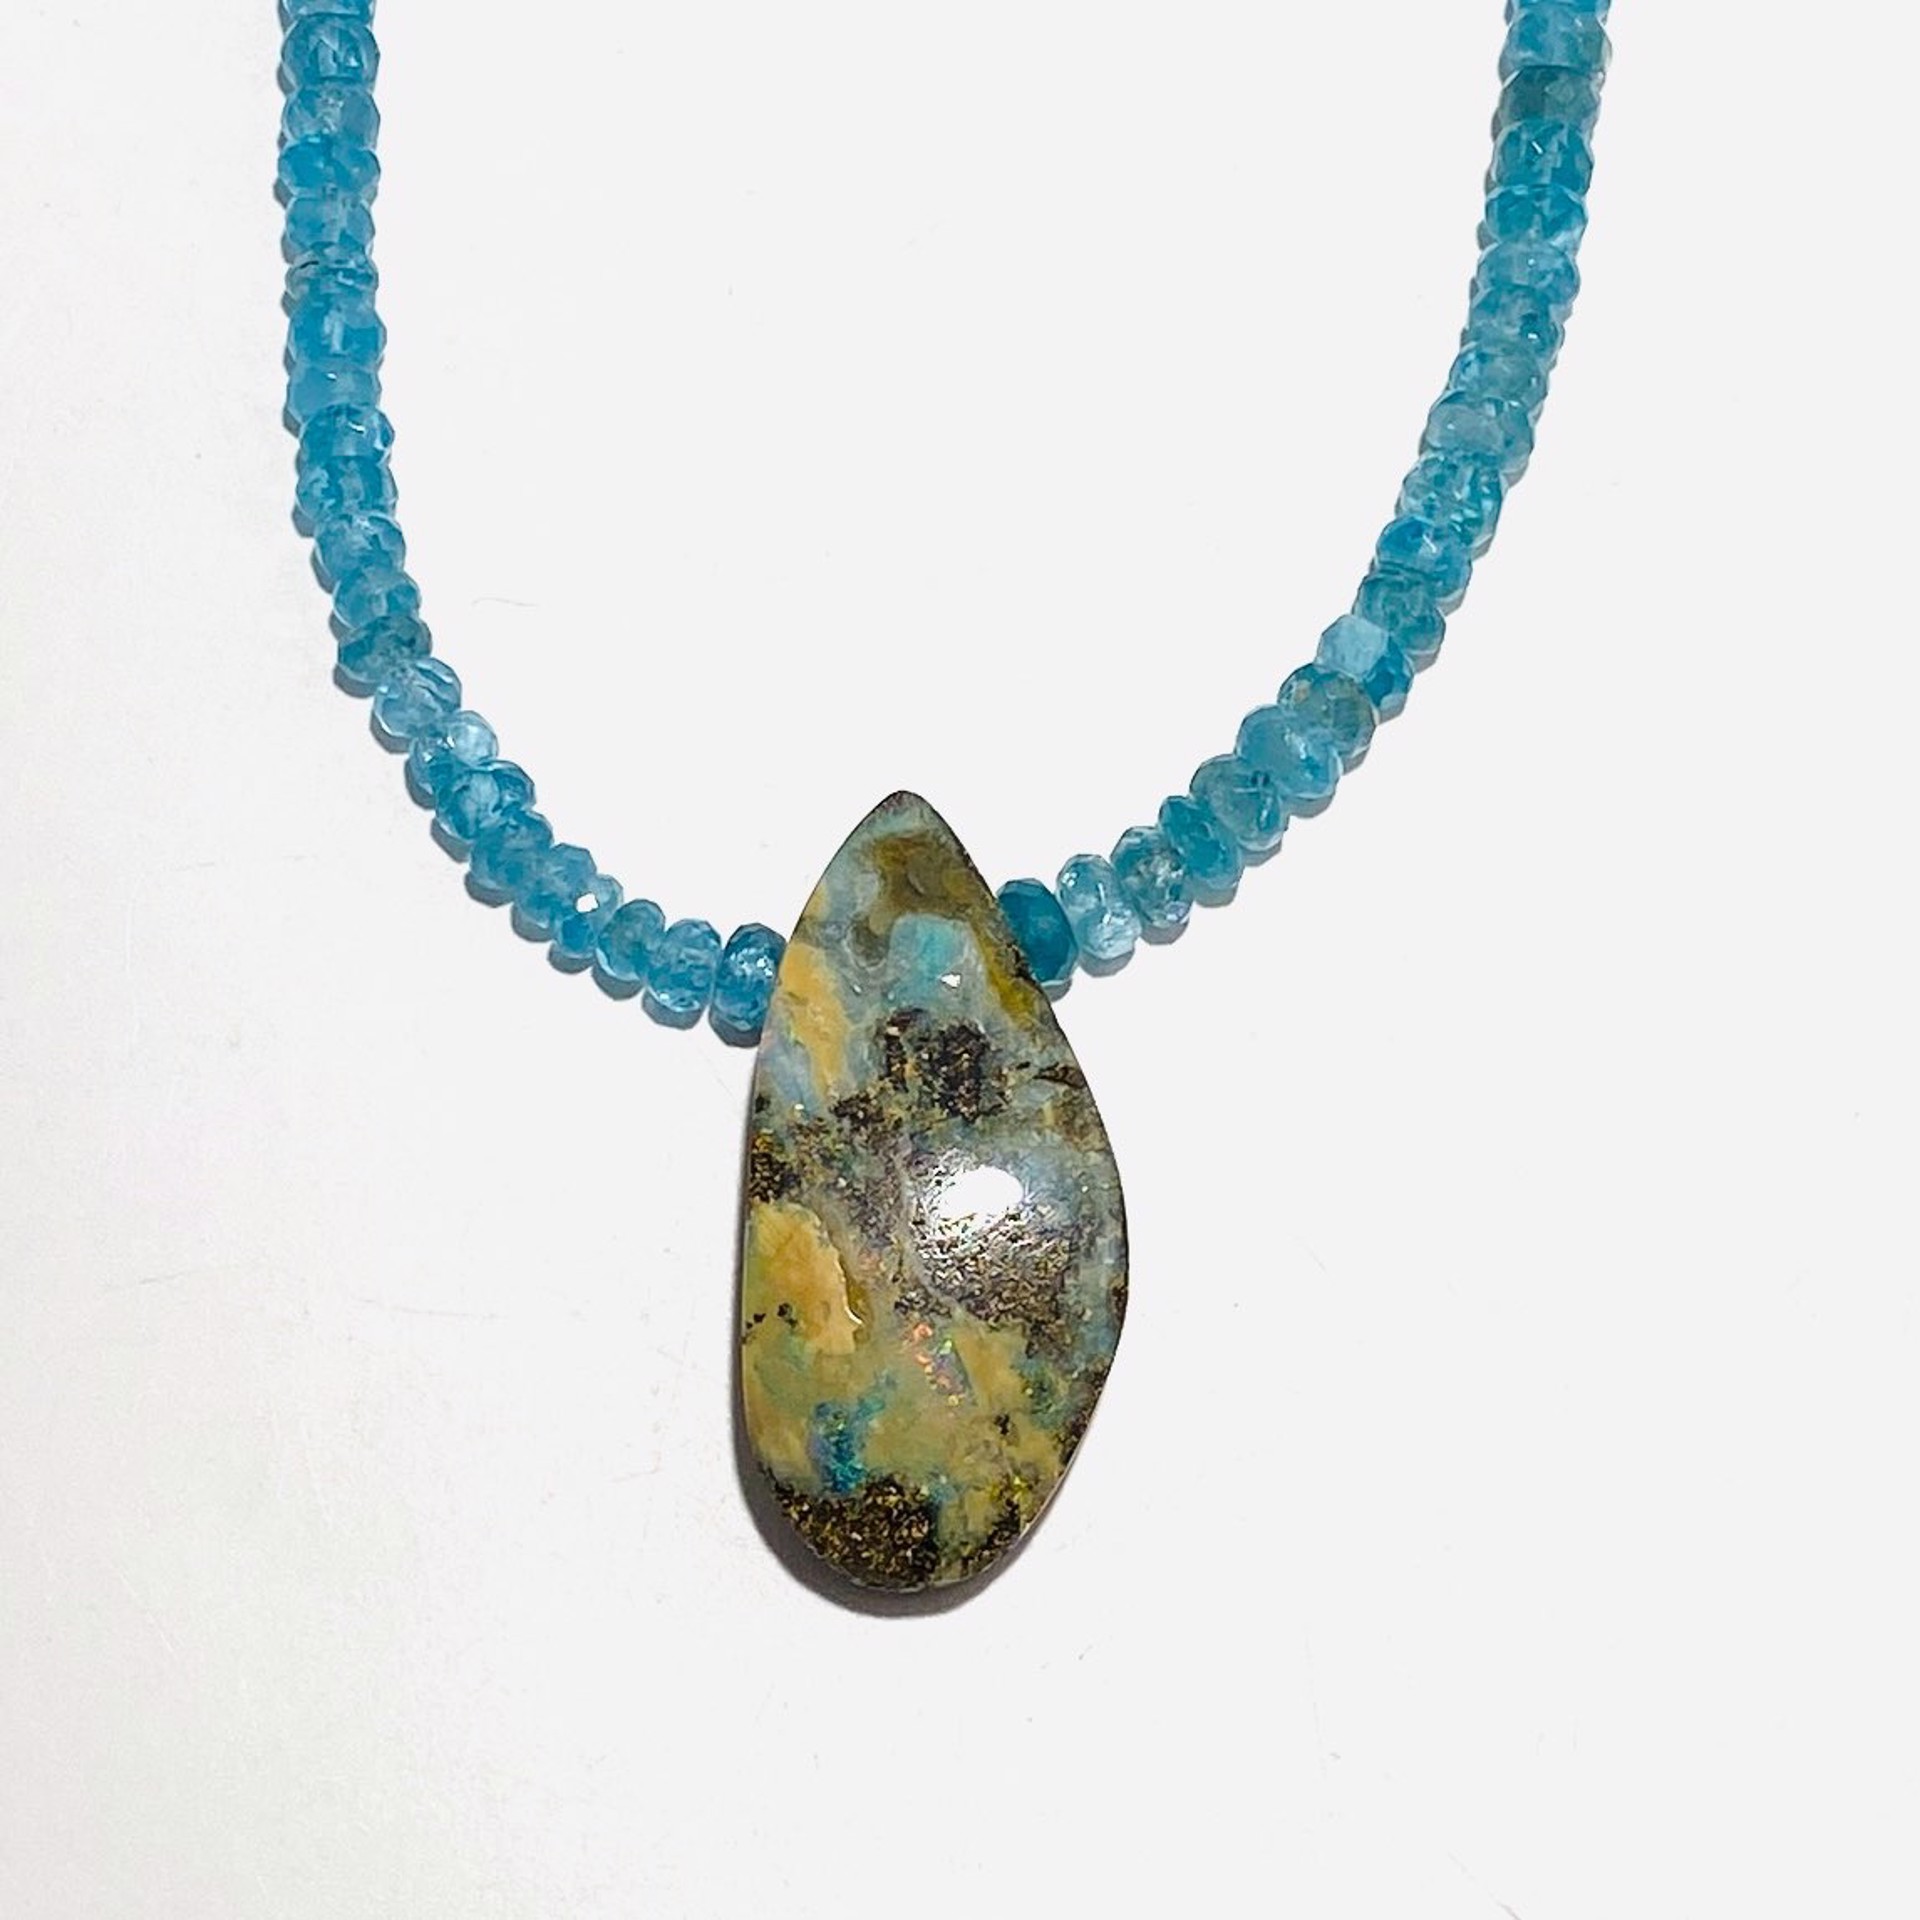 Faceted Apatite Large Australian Boulder Opal Necklace NT23-68 by Nance Trueworthy